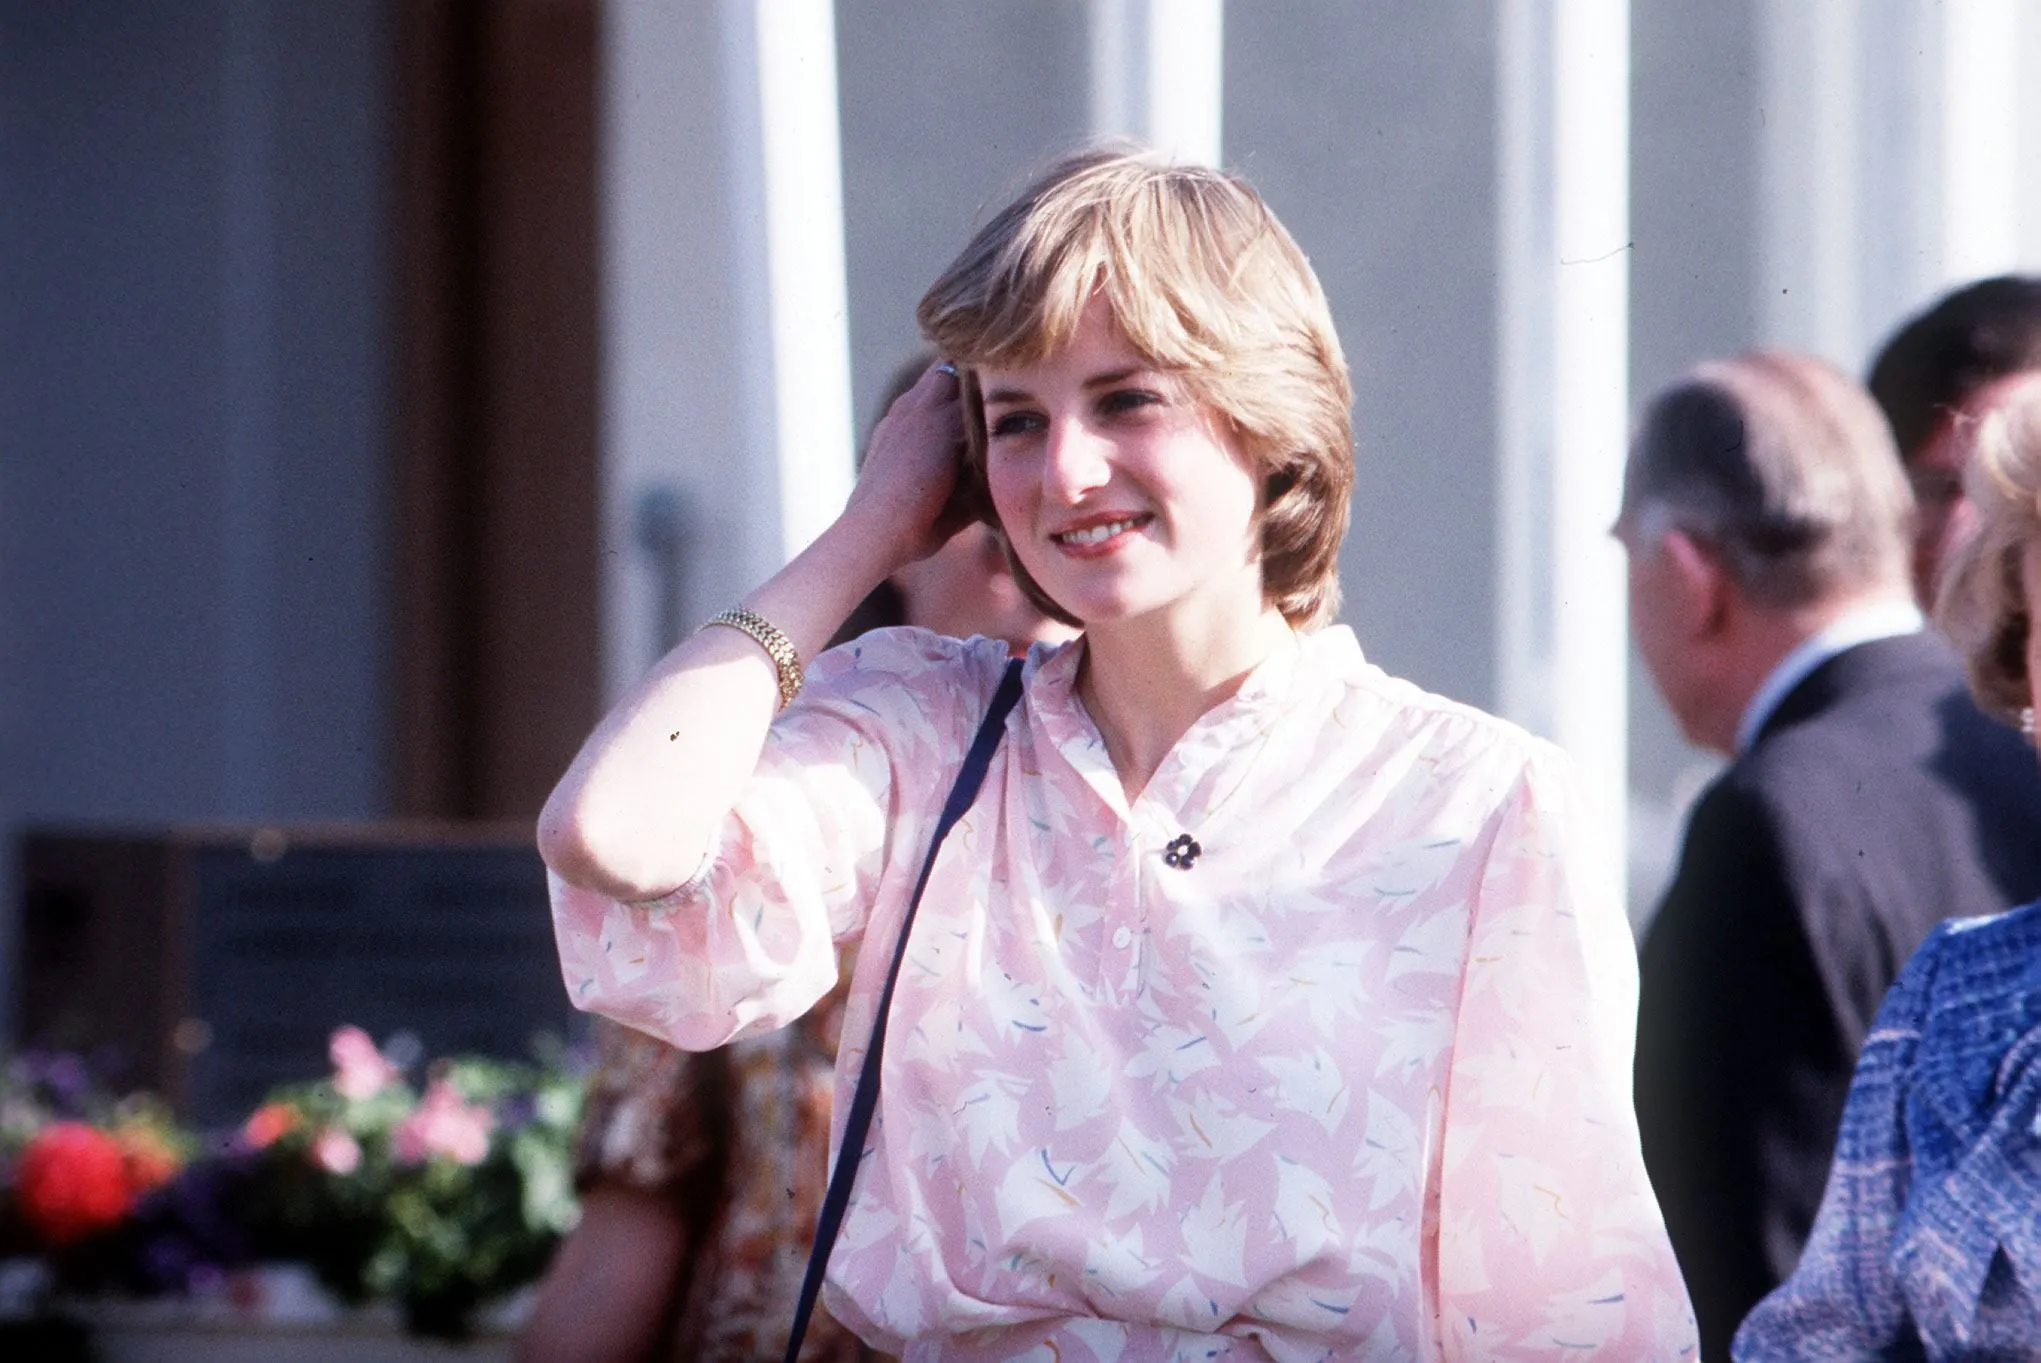 Things You Didn’t Know About Princess Diana